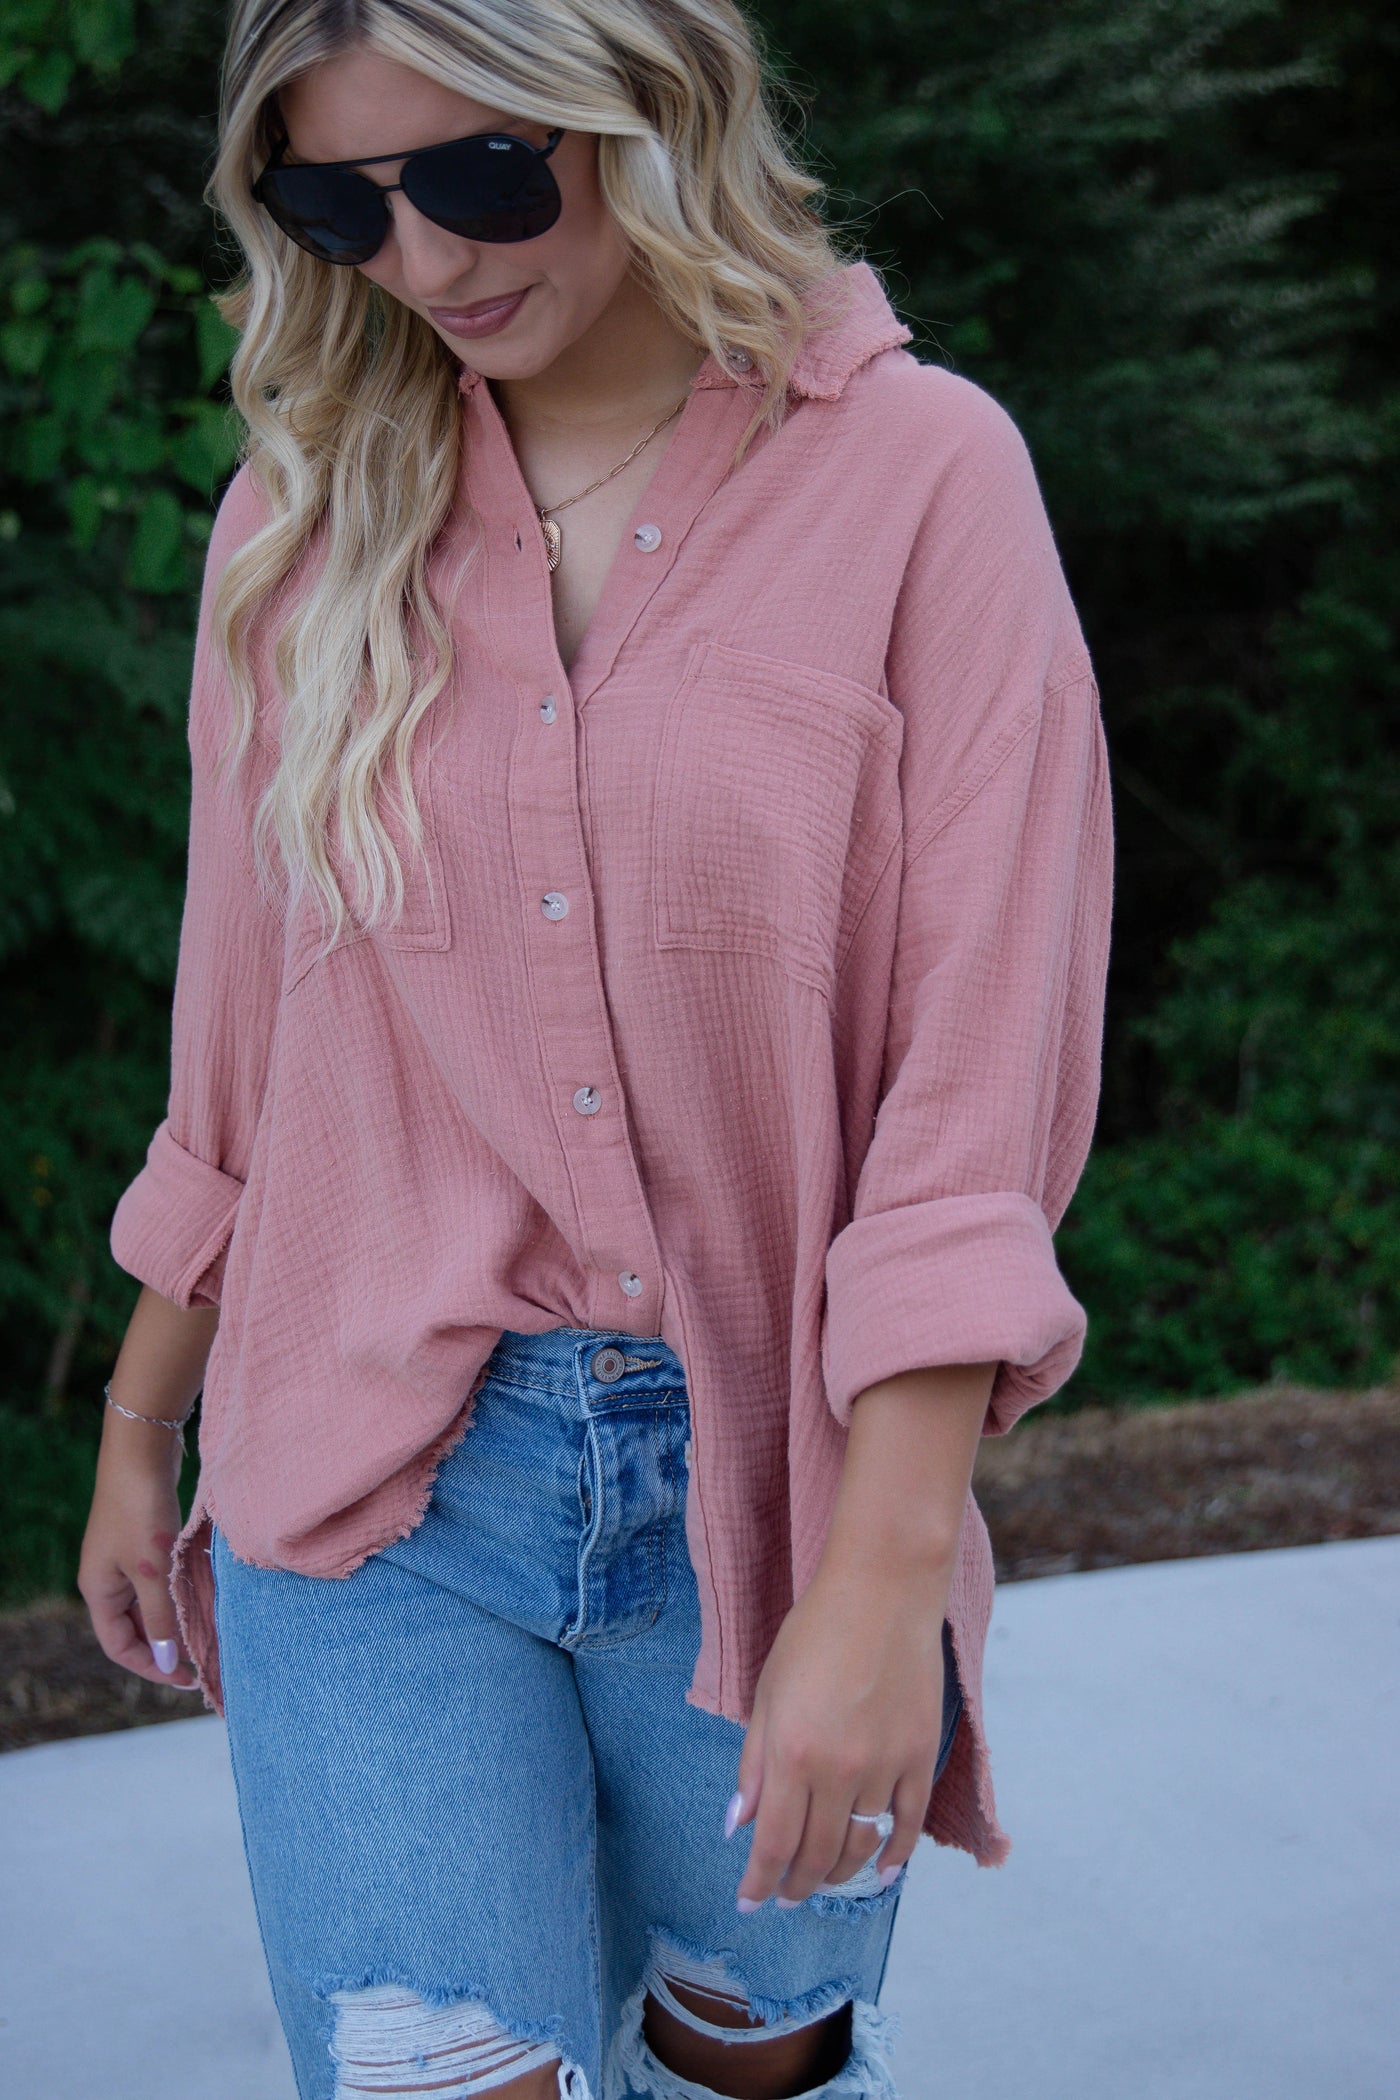 Women's Salmon Button Down- Cotton Button Down Top- Casual Top With Pockets